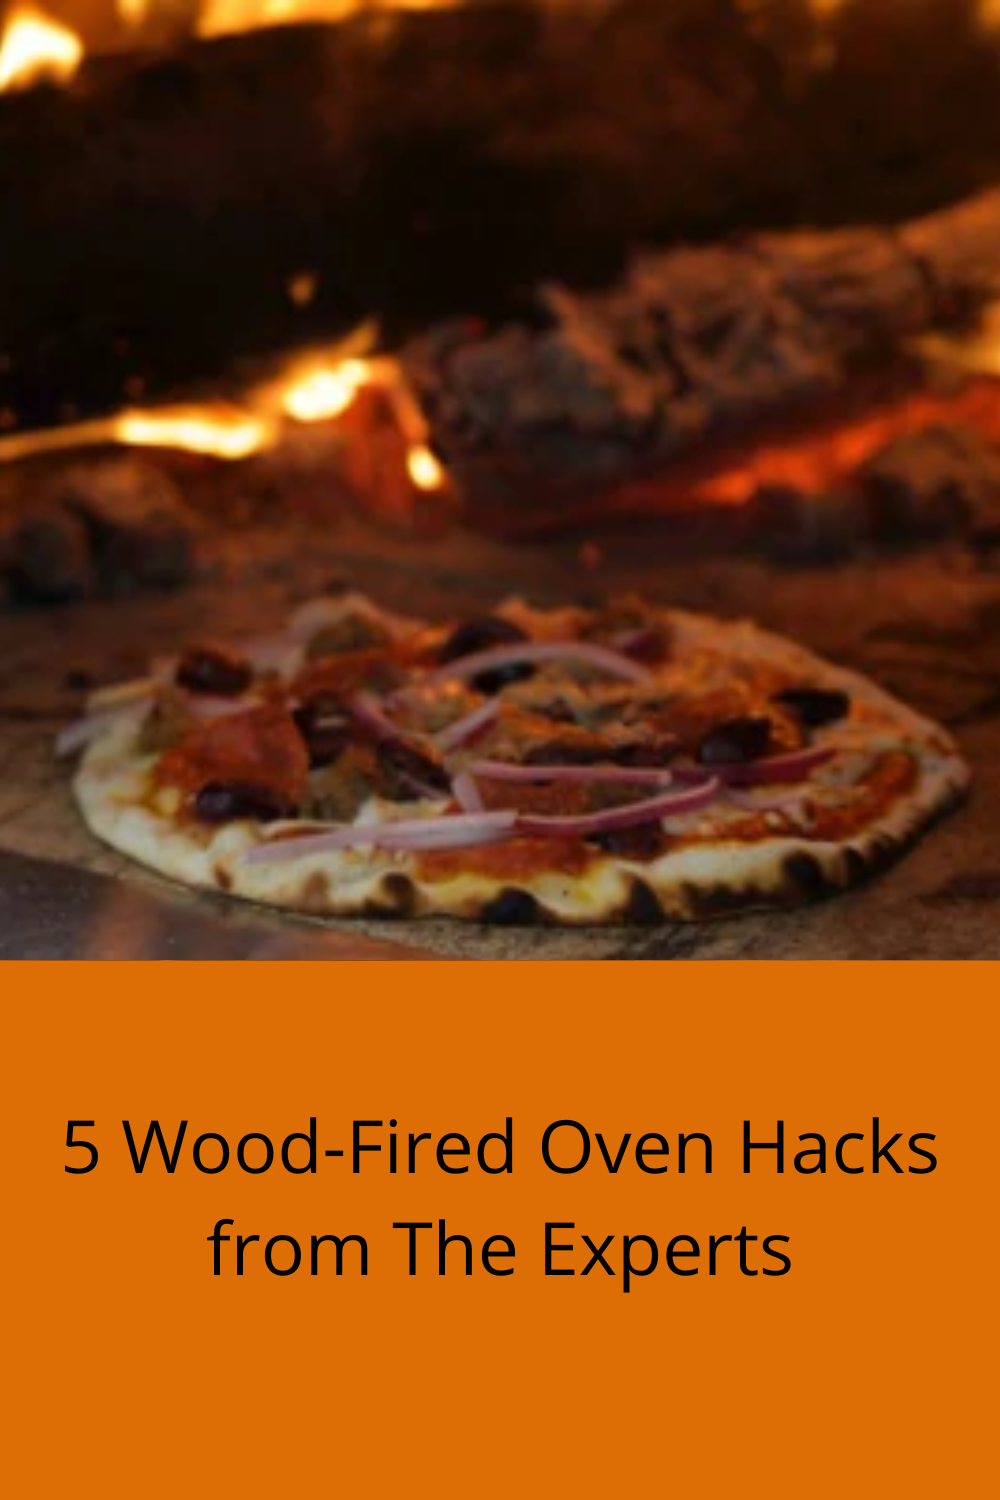 5 Wood-Fired Oven Hacks from The Experts